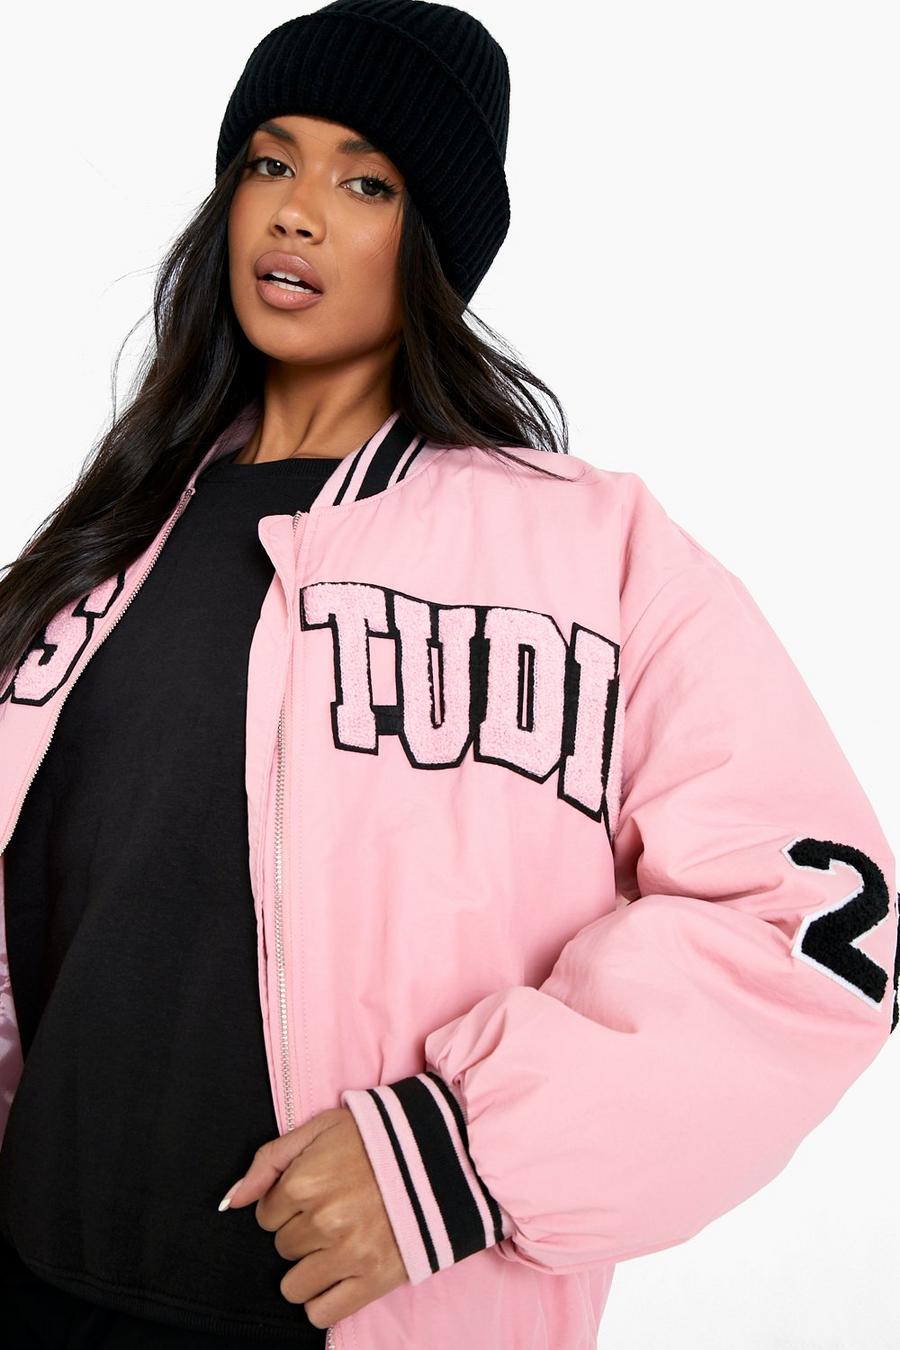 Veste style universitaire rose, Pink image number 1